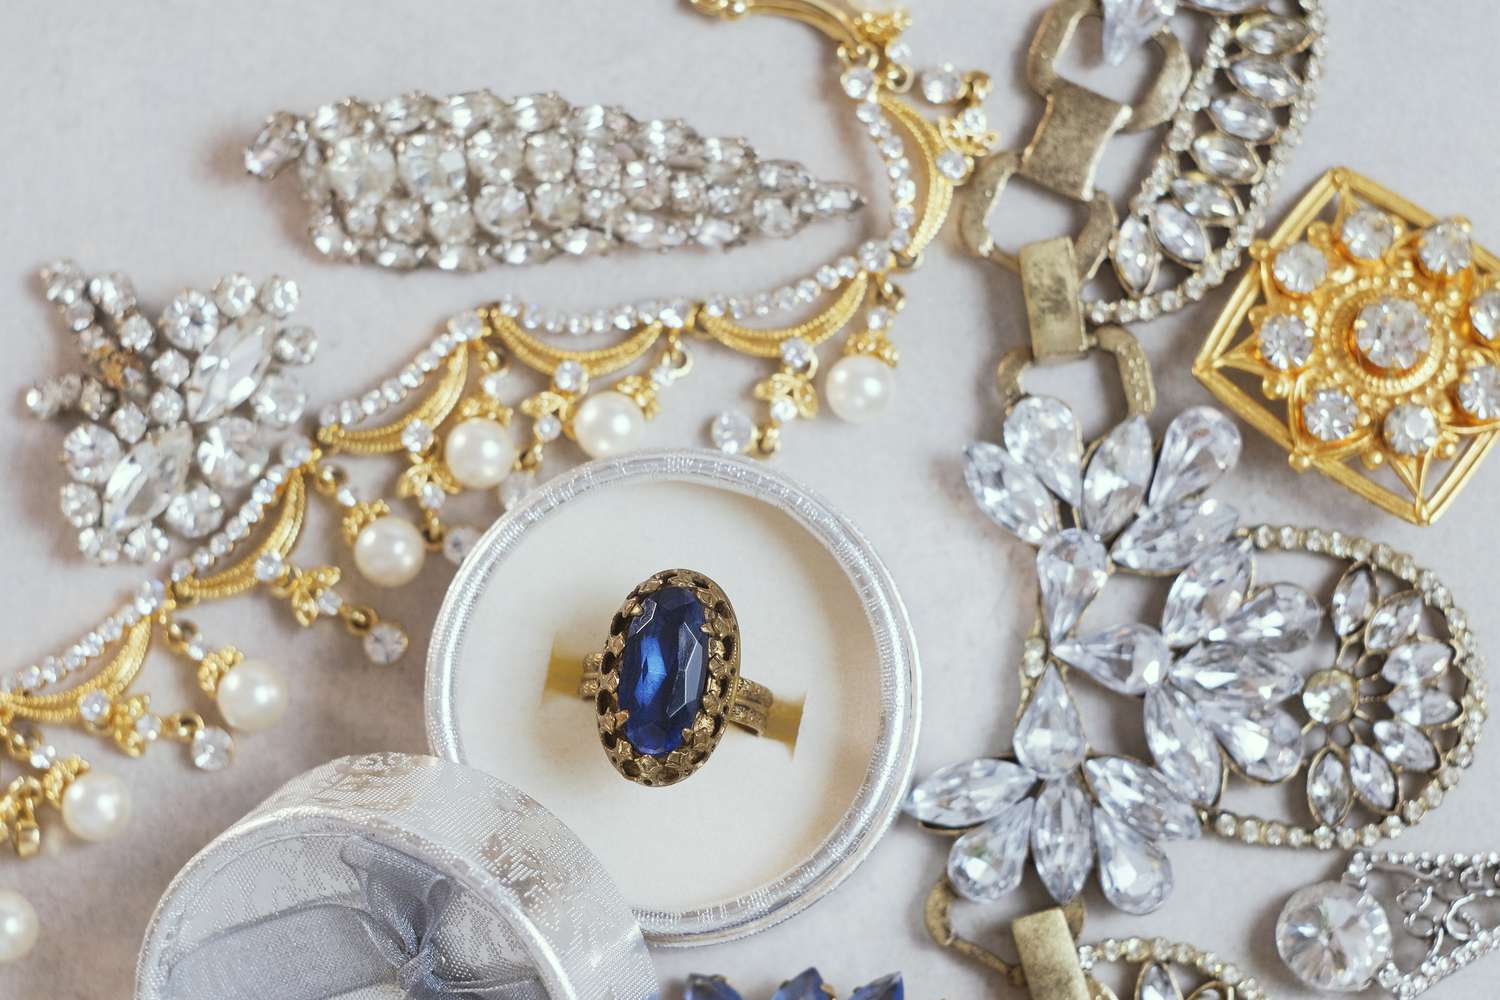 How To Keep Your Antique & Vintage Jewellery Sparkling Clean